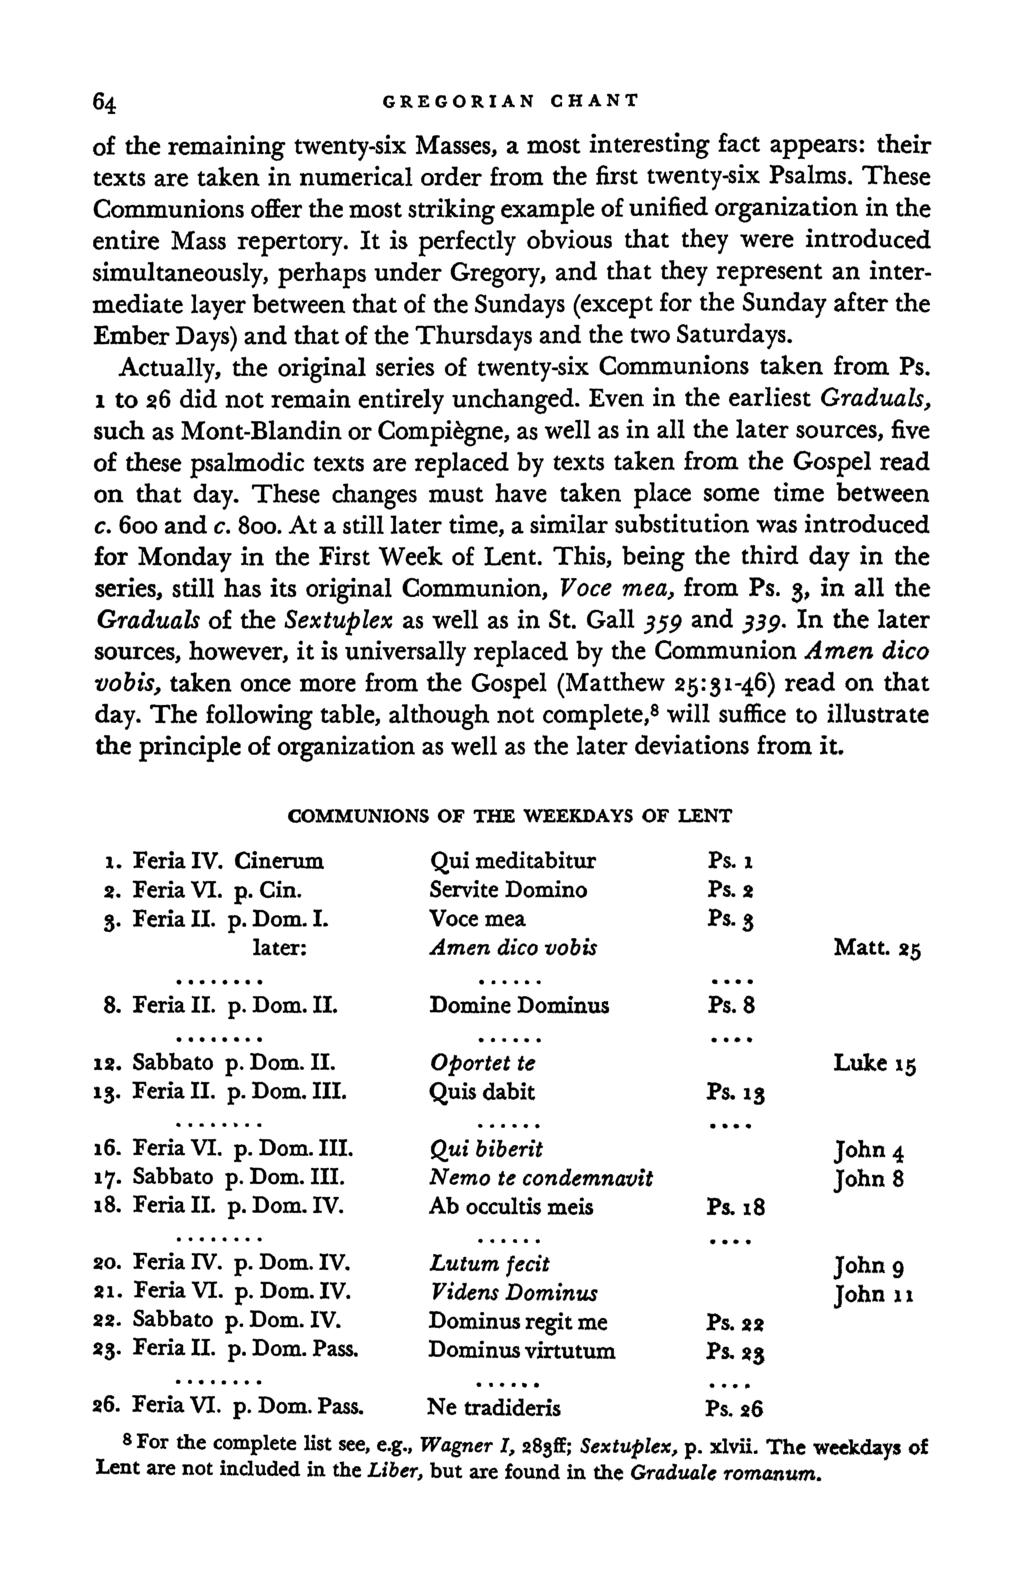 64 GREGORIAN CHANT of the remaining twenty-six Masses, a most interesting fact appears: their texts are taken in numerical order from the first twenty-six Psalms.